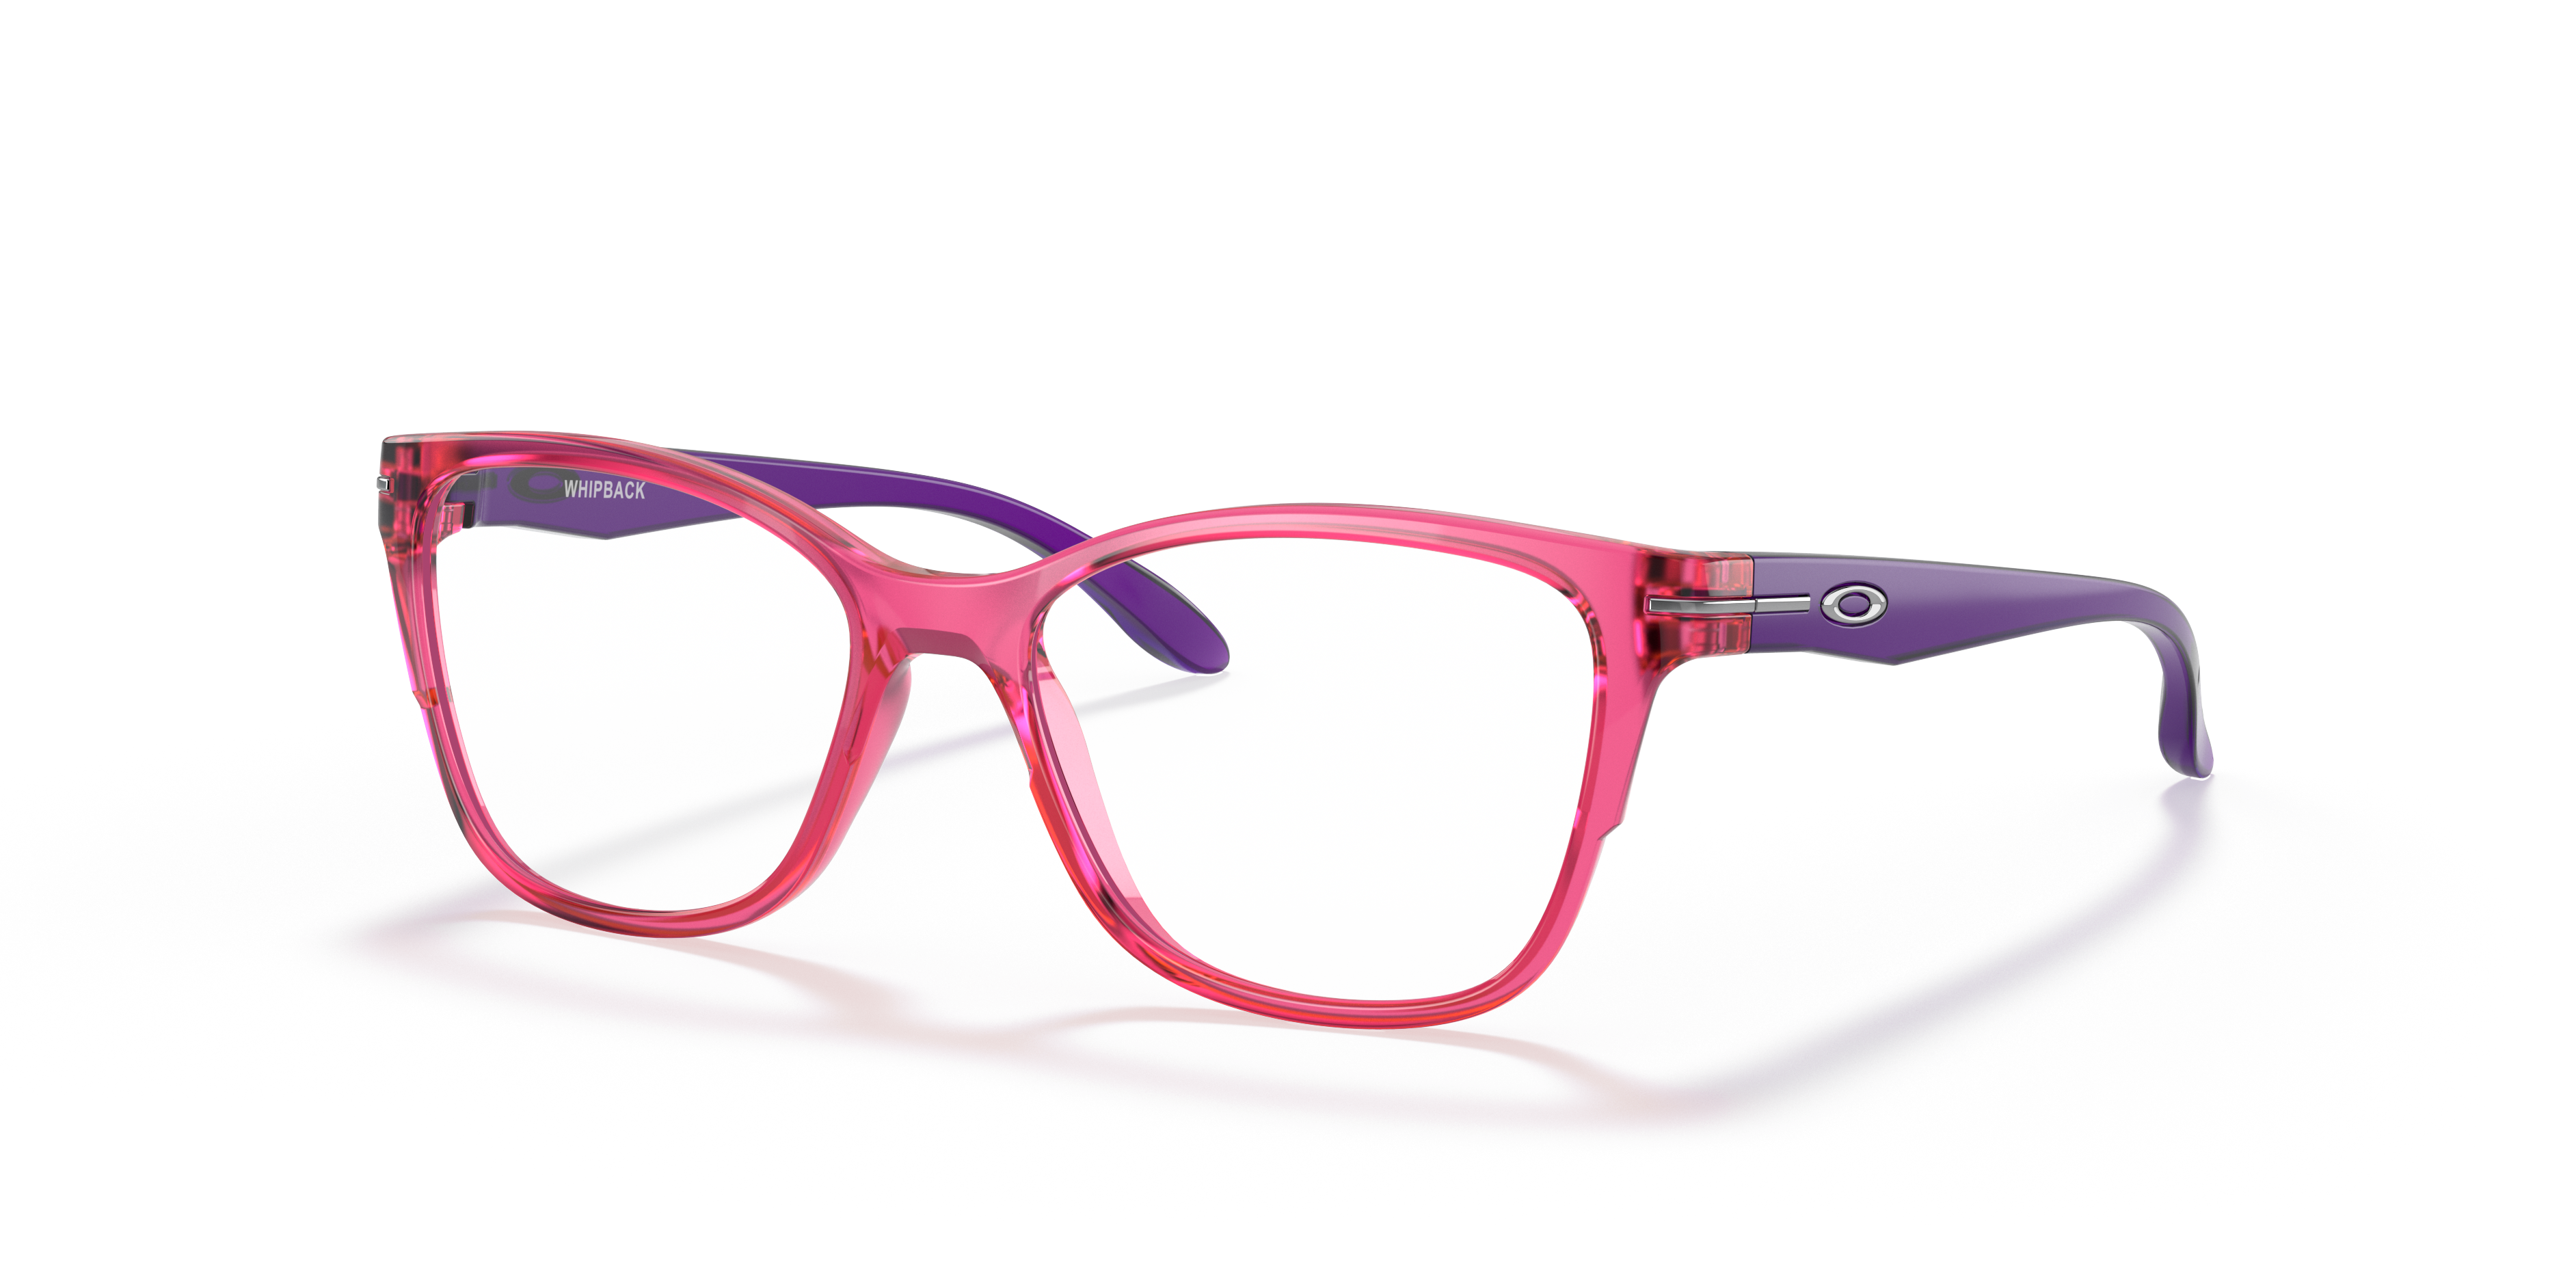 Oakley Whipback (youth Fit) In Pink